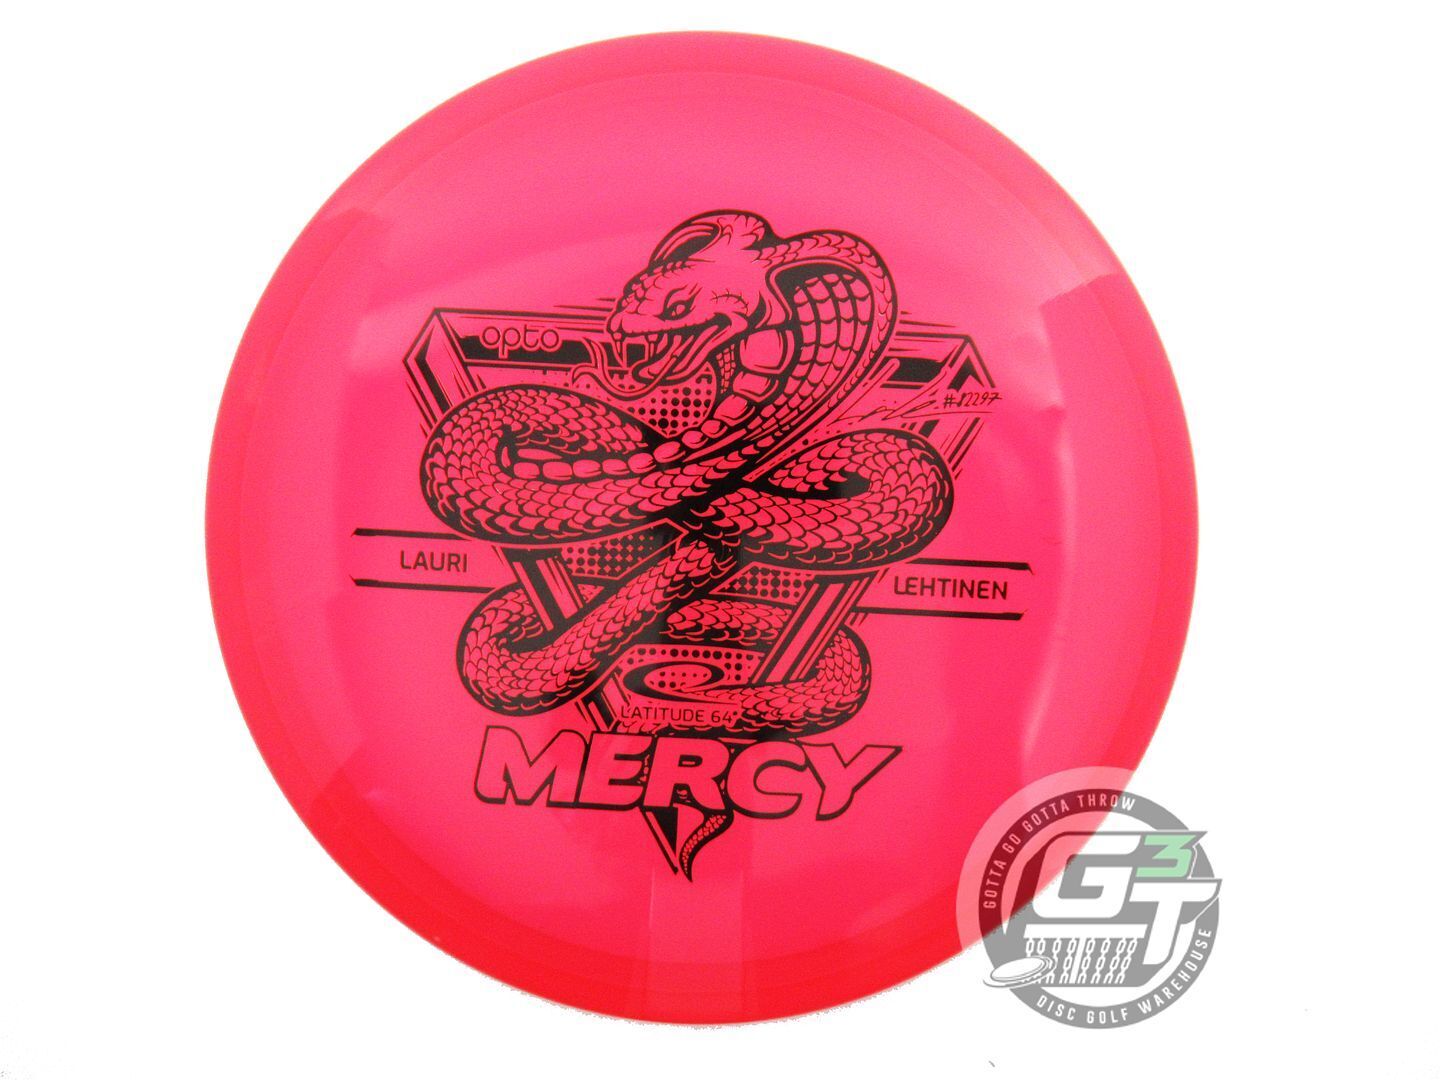 Latitude 64 Limited Edition 2022 Team Series Lauri Lehtinen Opto Line Mercy Putter Golf Disc (Individually Listed)